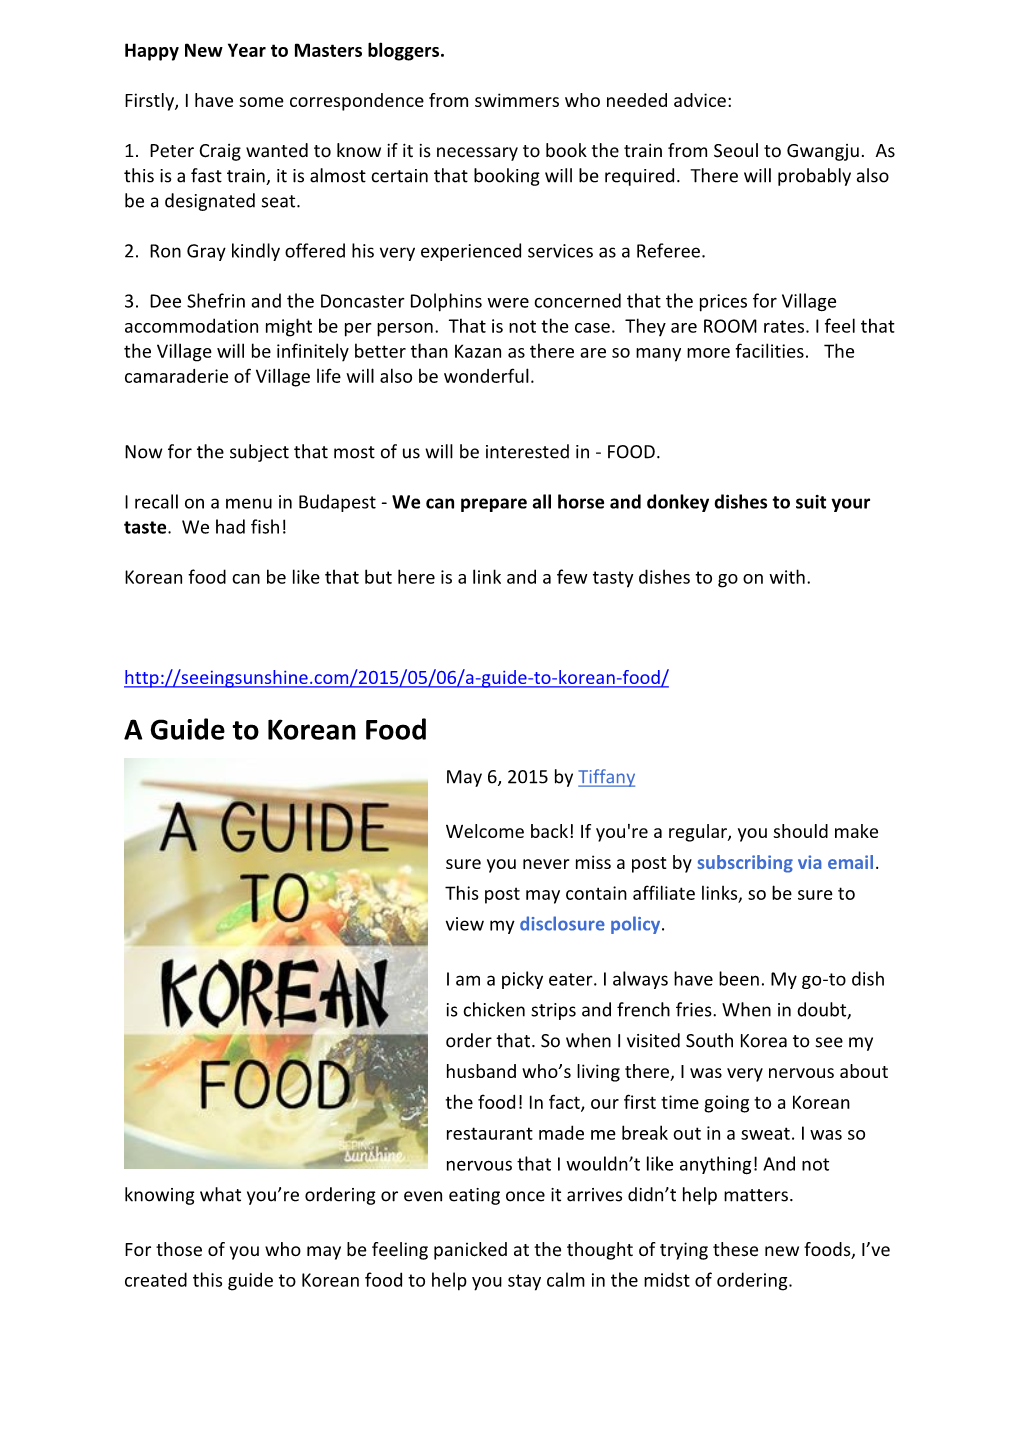 A Guide to Korean Food